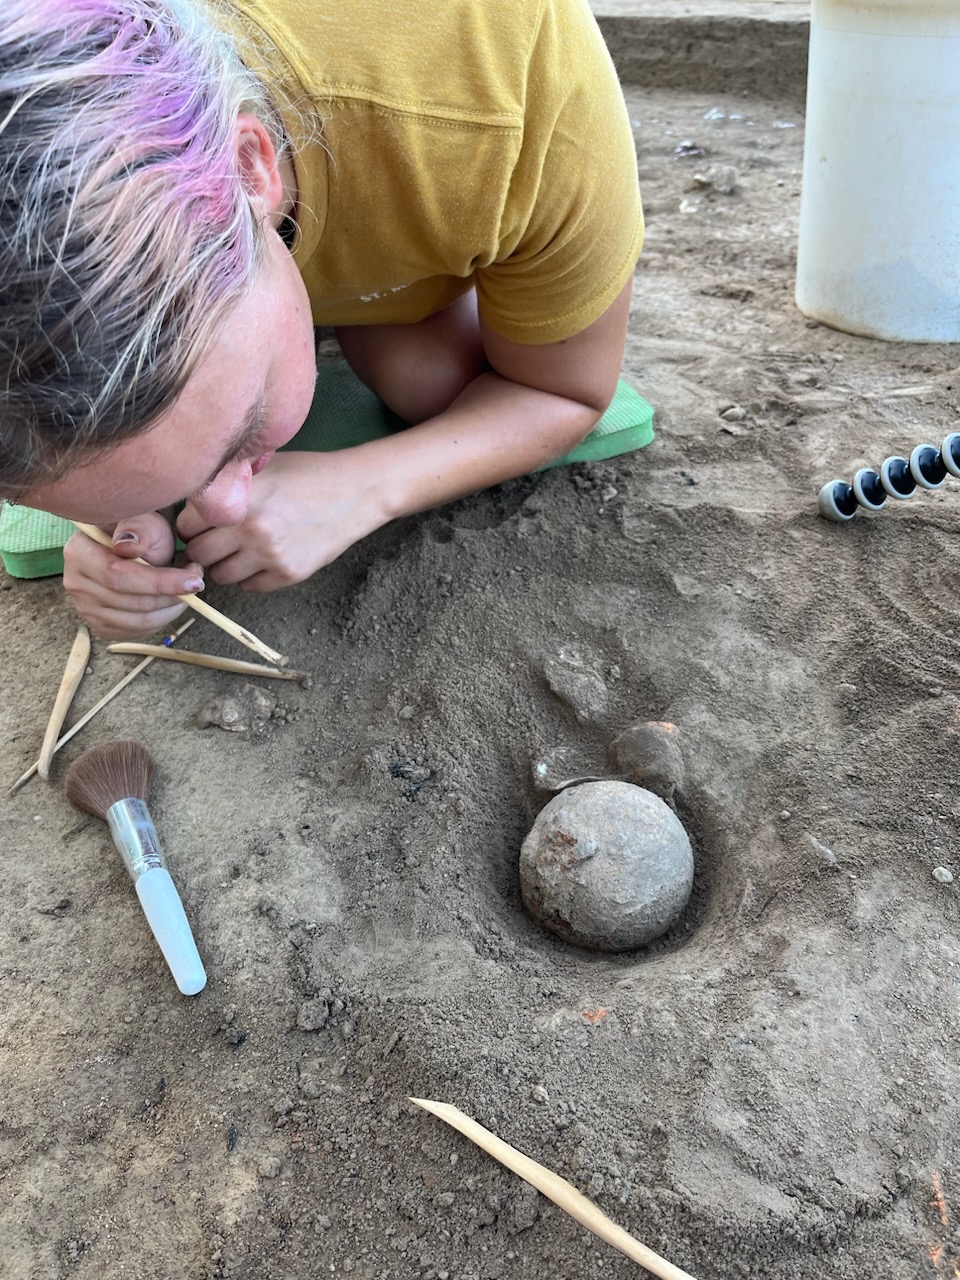 rare armor unearthed at site of 17th-century fort in maryland